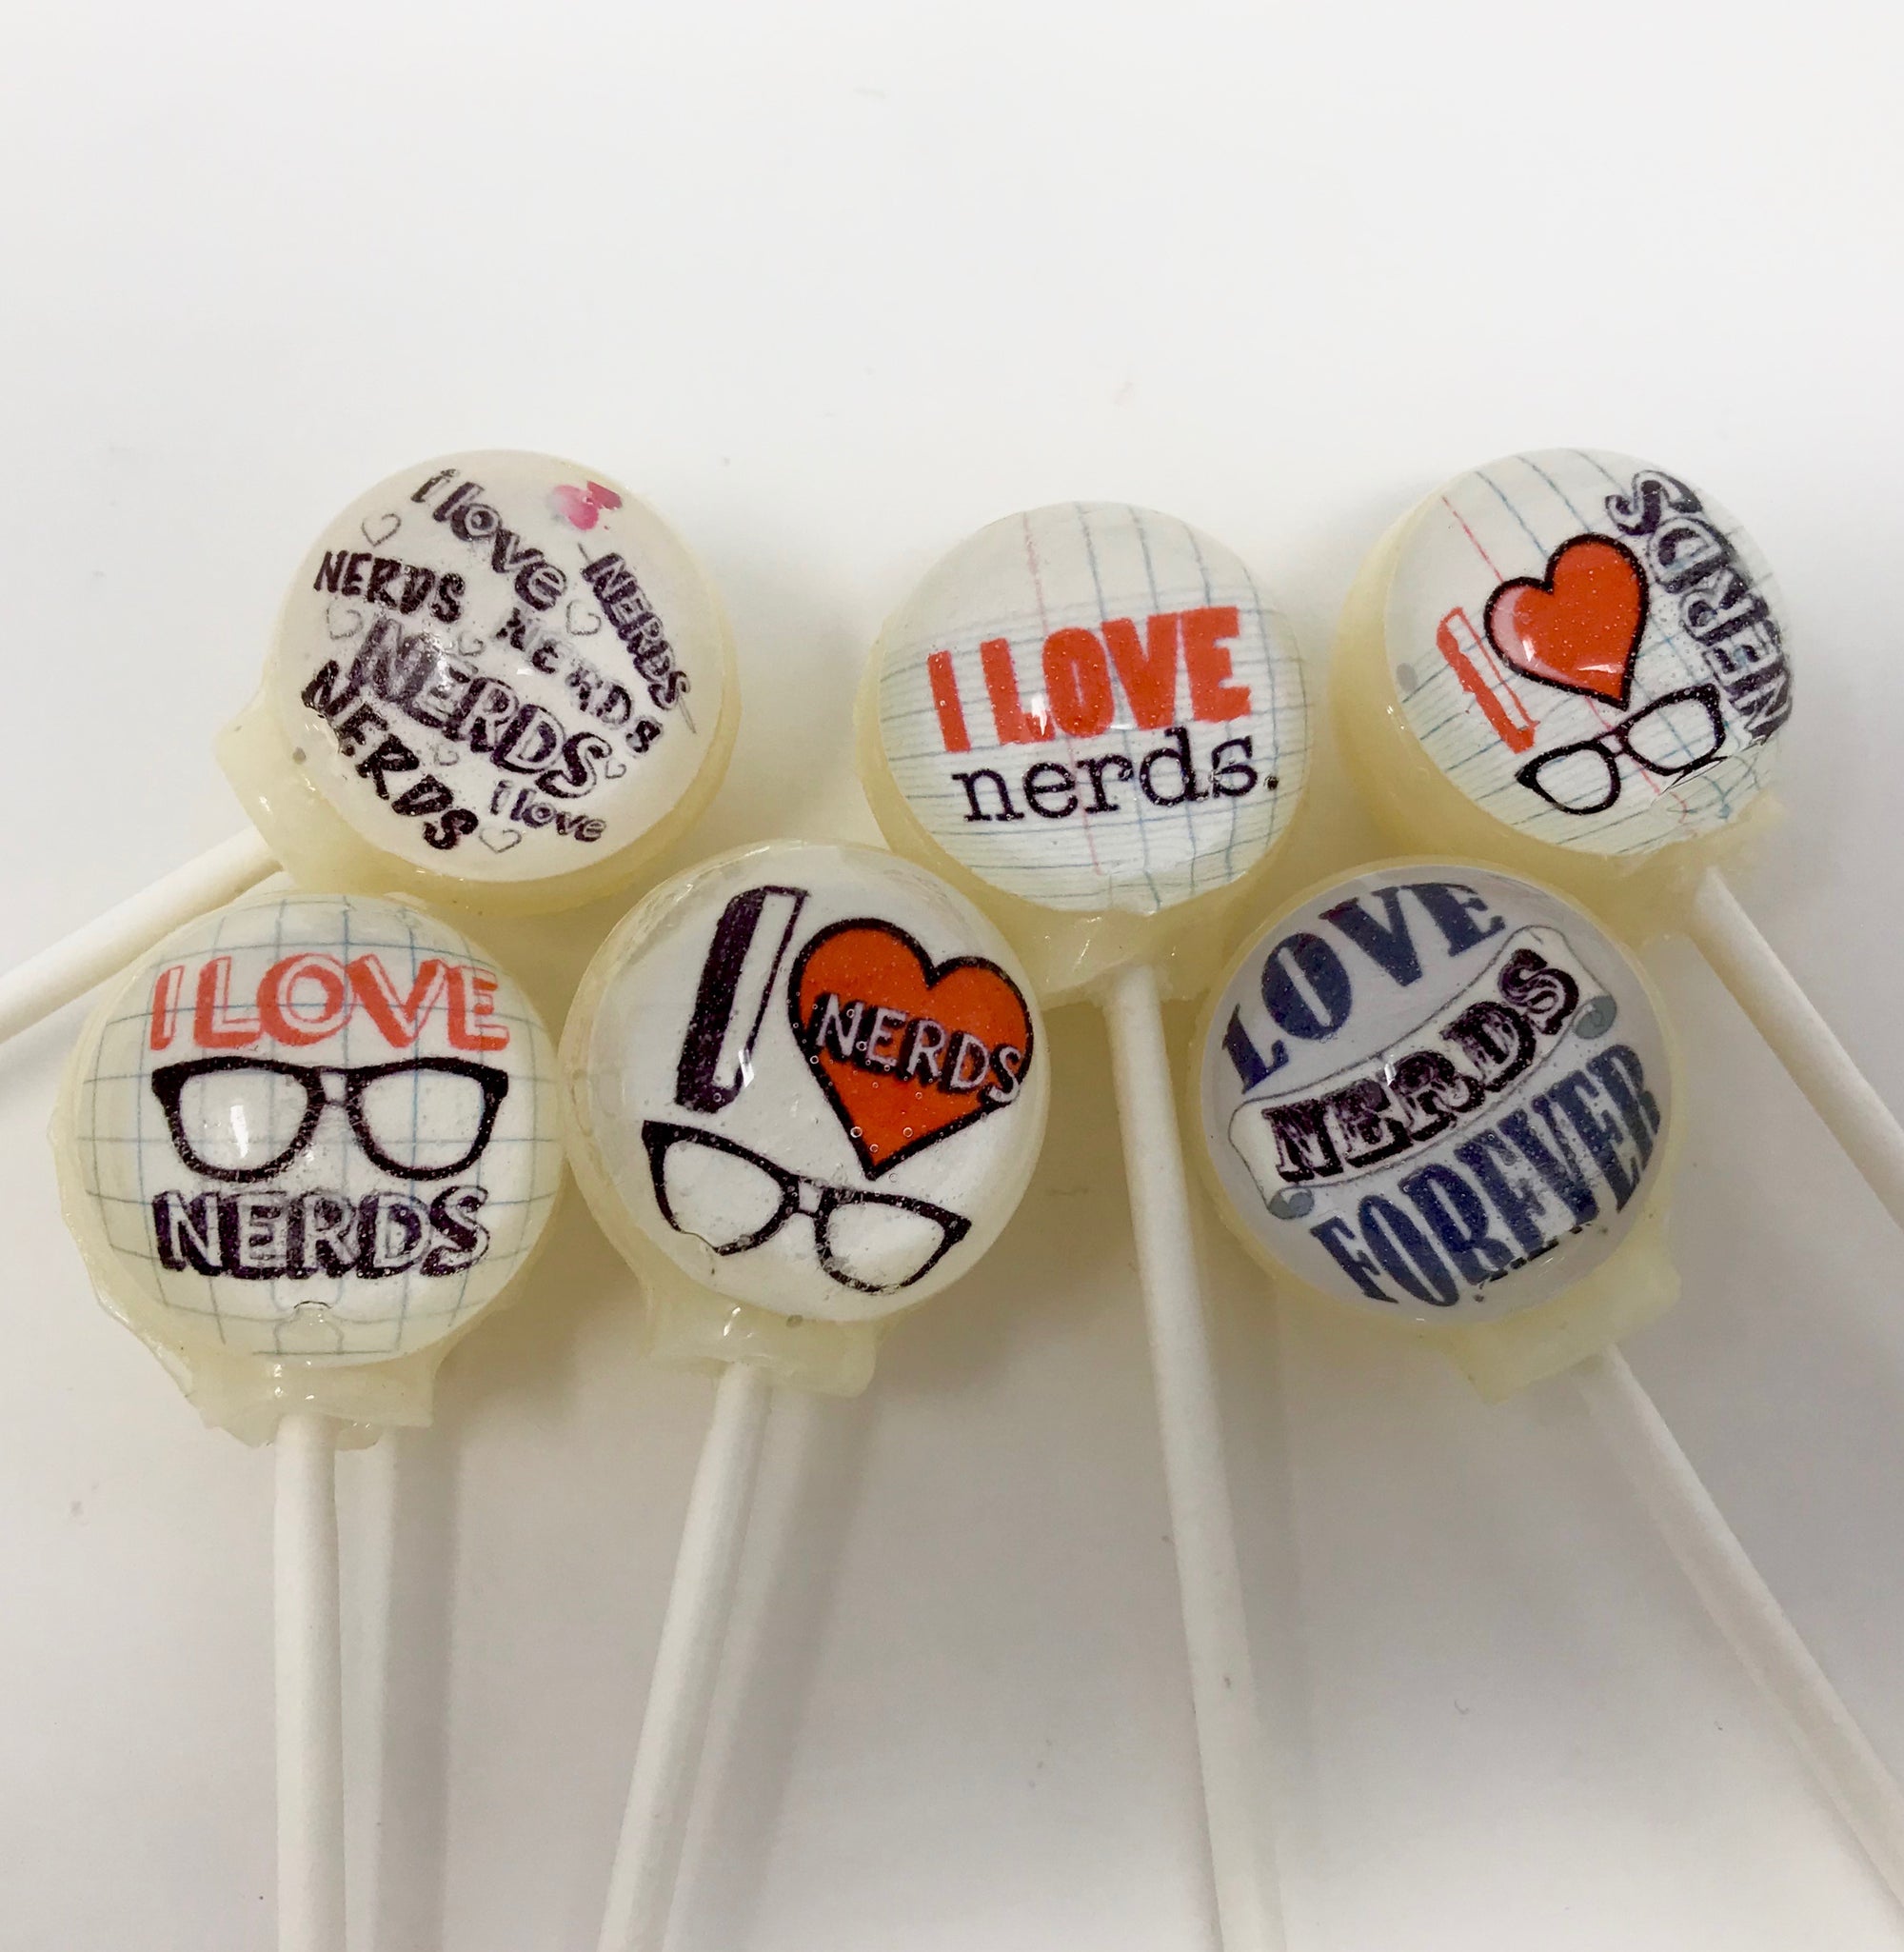 I Love Geeks and Nerds Lollipops 6-piece set by I Want Candy!